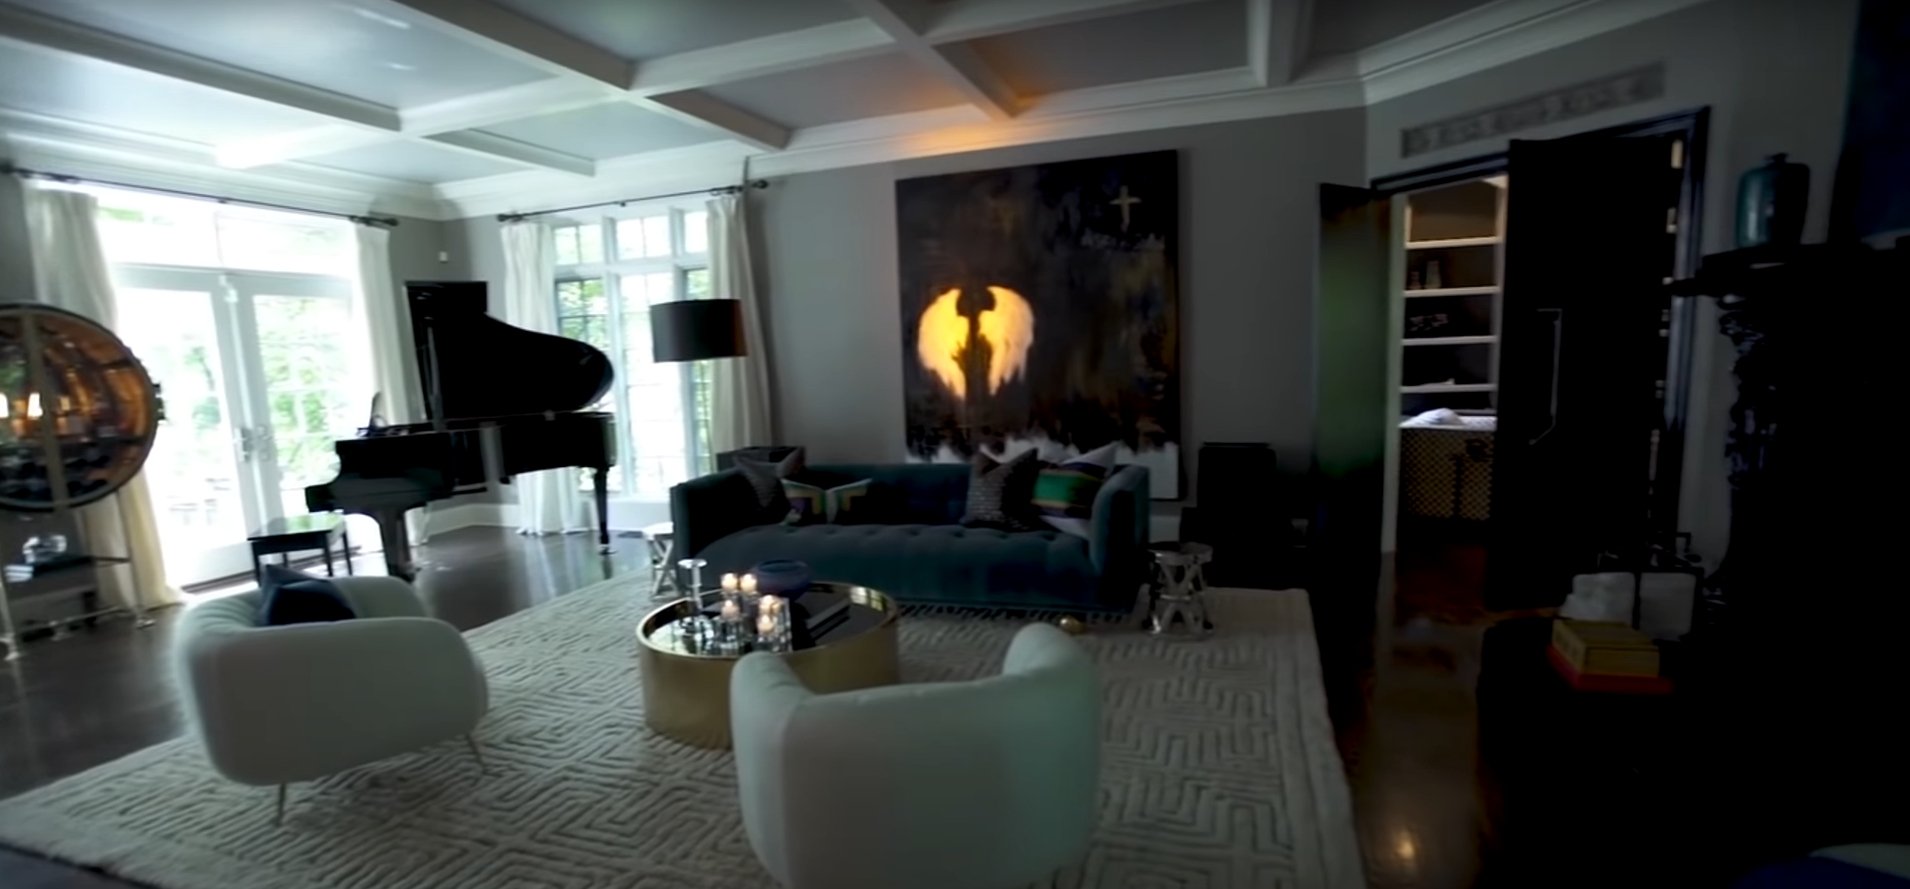 Picture of the interior design of the family room of Wahlberg's and McCarthy's home | Photo: YouTube/People